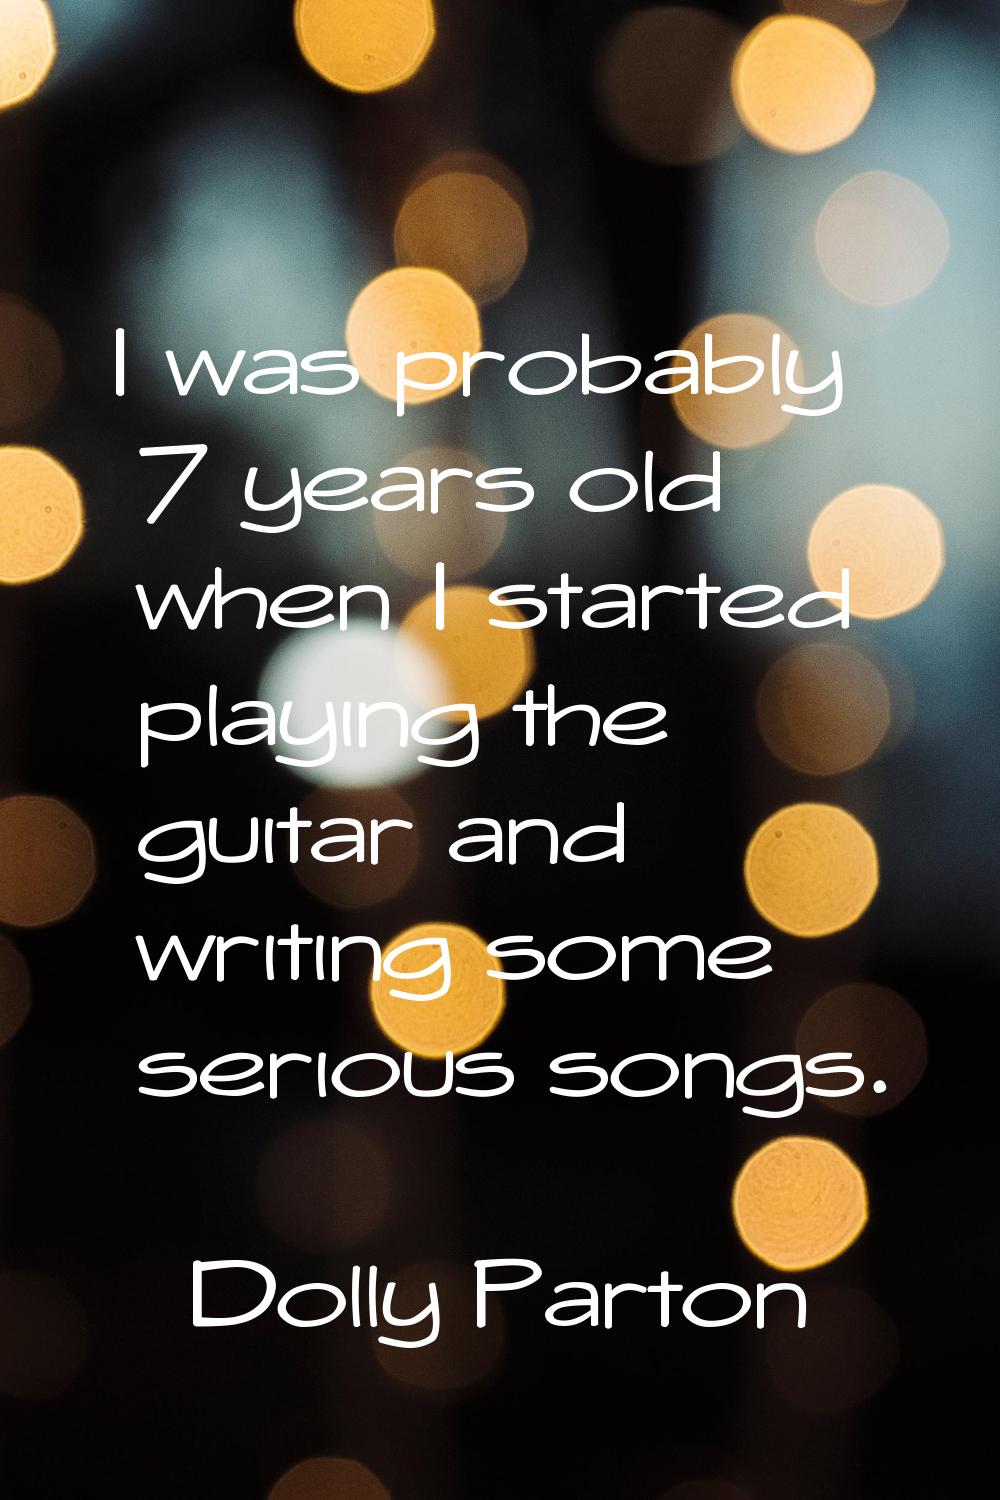 I was probably 7 years old when I started playing the guitar and writing some serious songs.